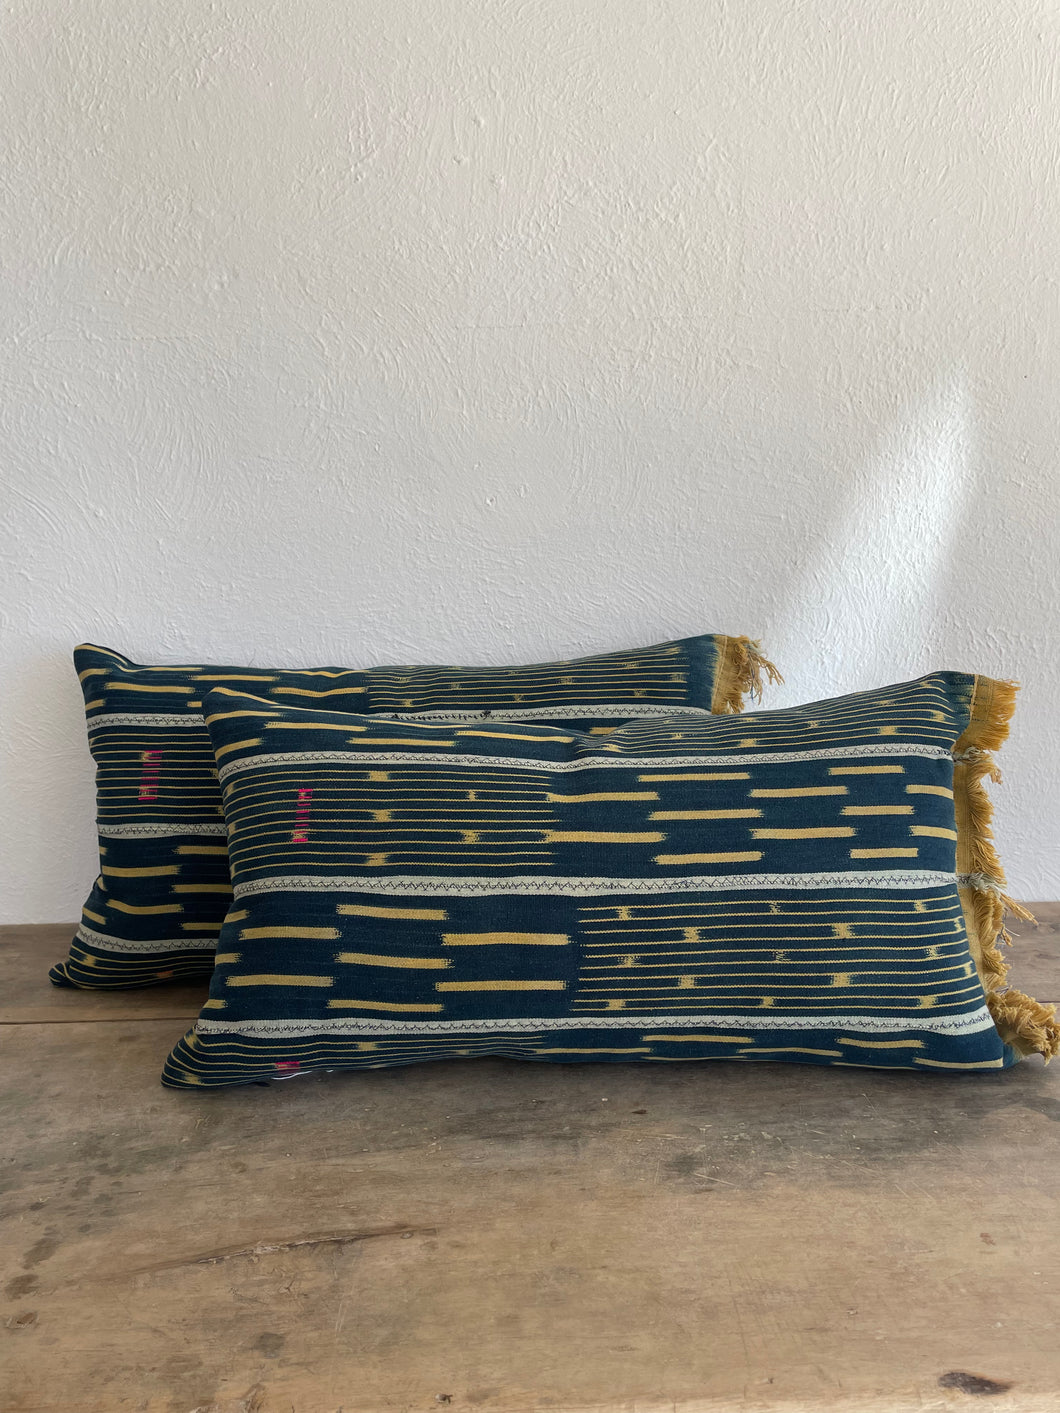 Vintage African Baule Navy/Yellow Pillows